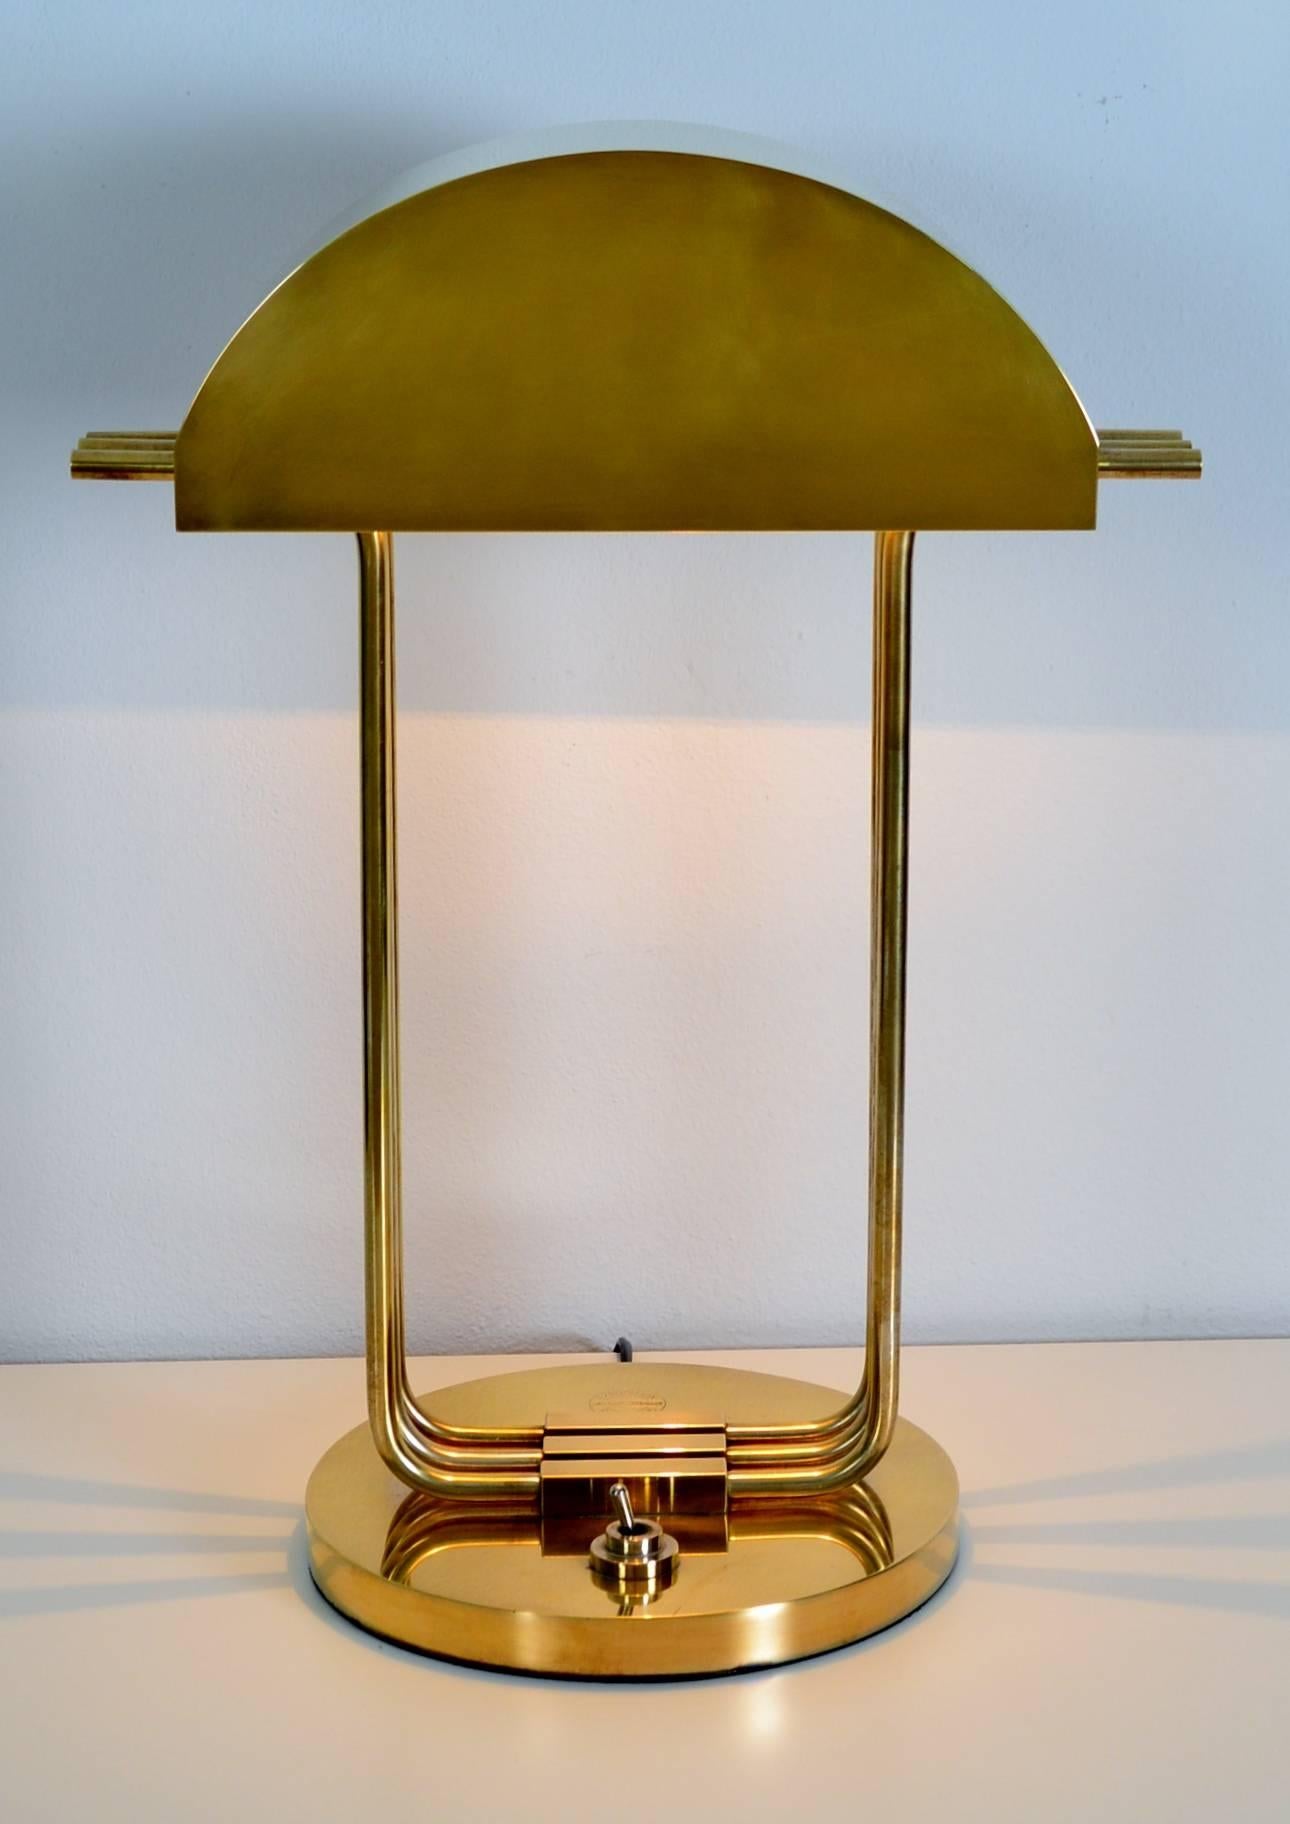 This beautiful desk lamp comes from the series of lamps designed from Marcel Breuer, which were presented during the exhibition in Paris in 1925.

Marcel Breuer, well known for the design of the Wassily chair, returned after a period of training